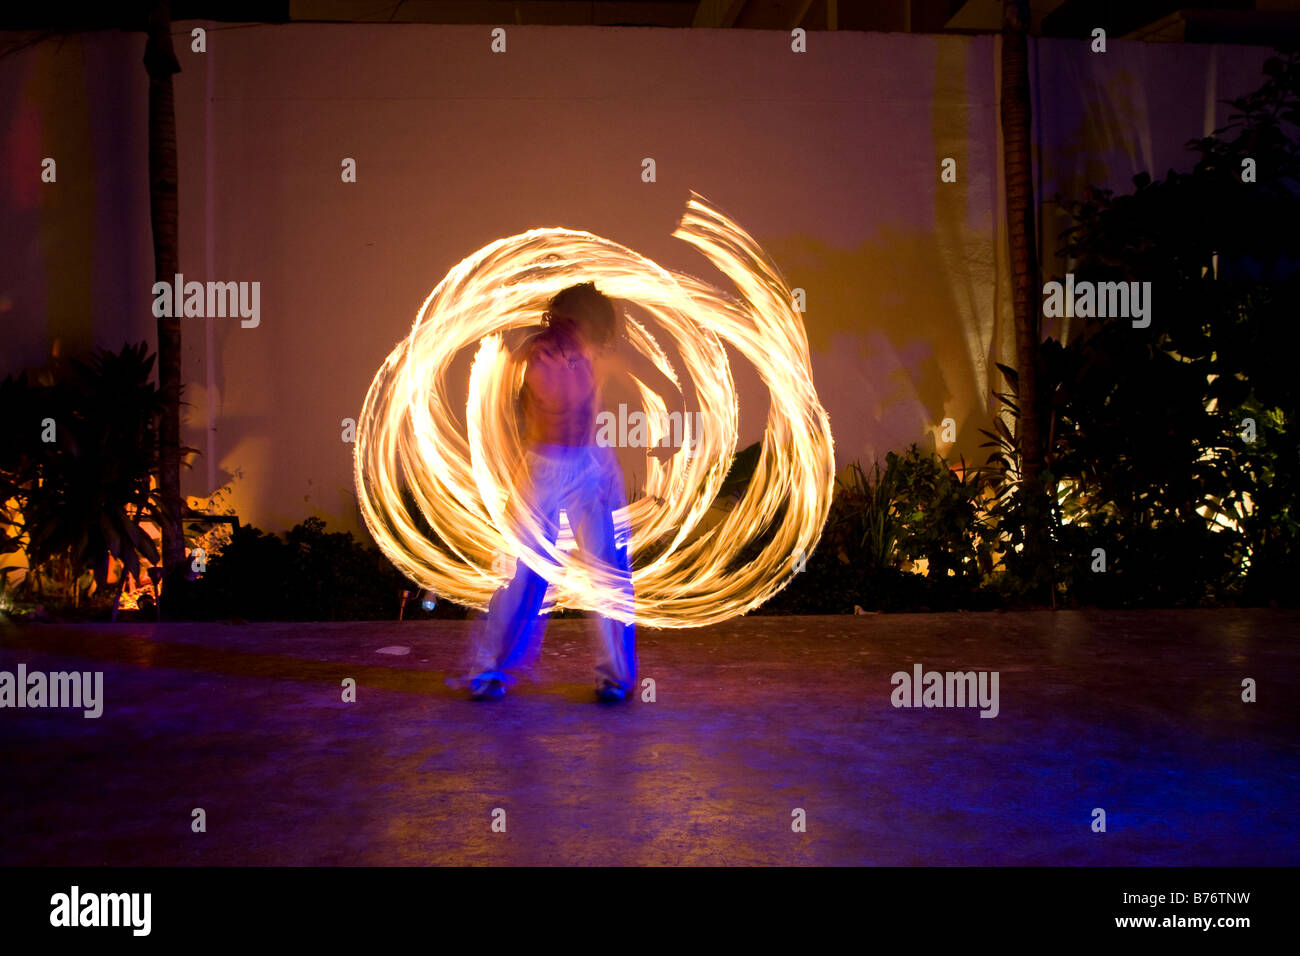 Fire Dancers putting on a show at night in Playa Del Carmen Mexico Stock Photo